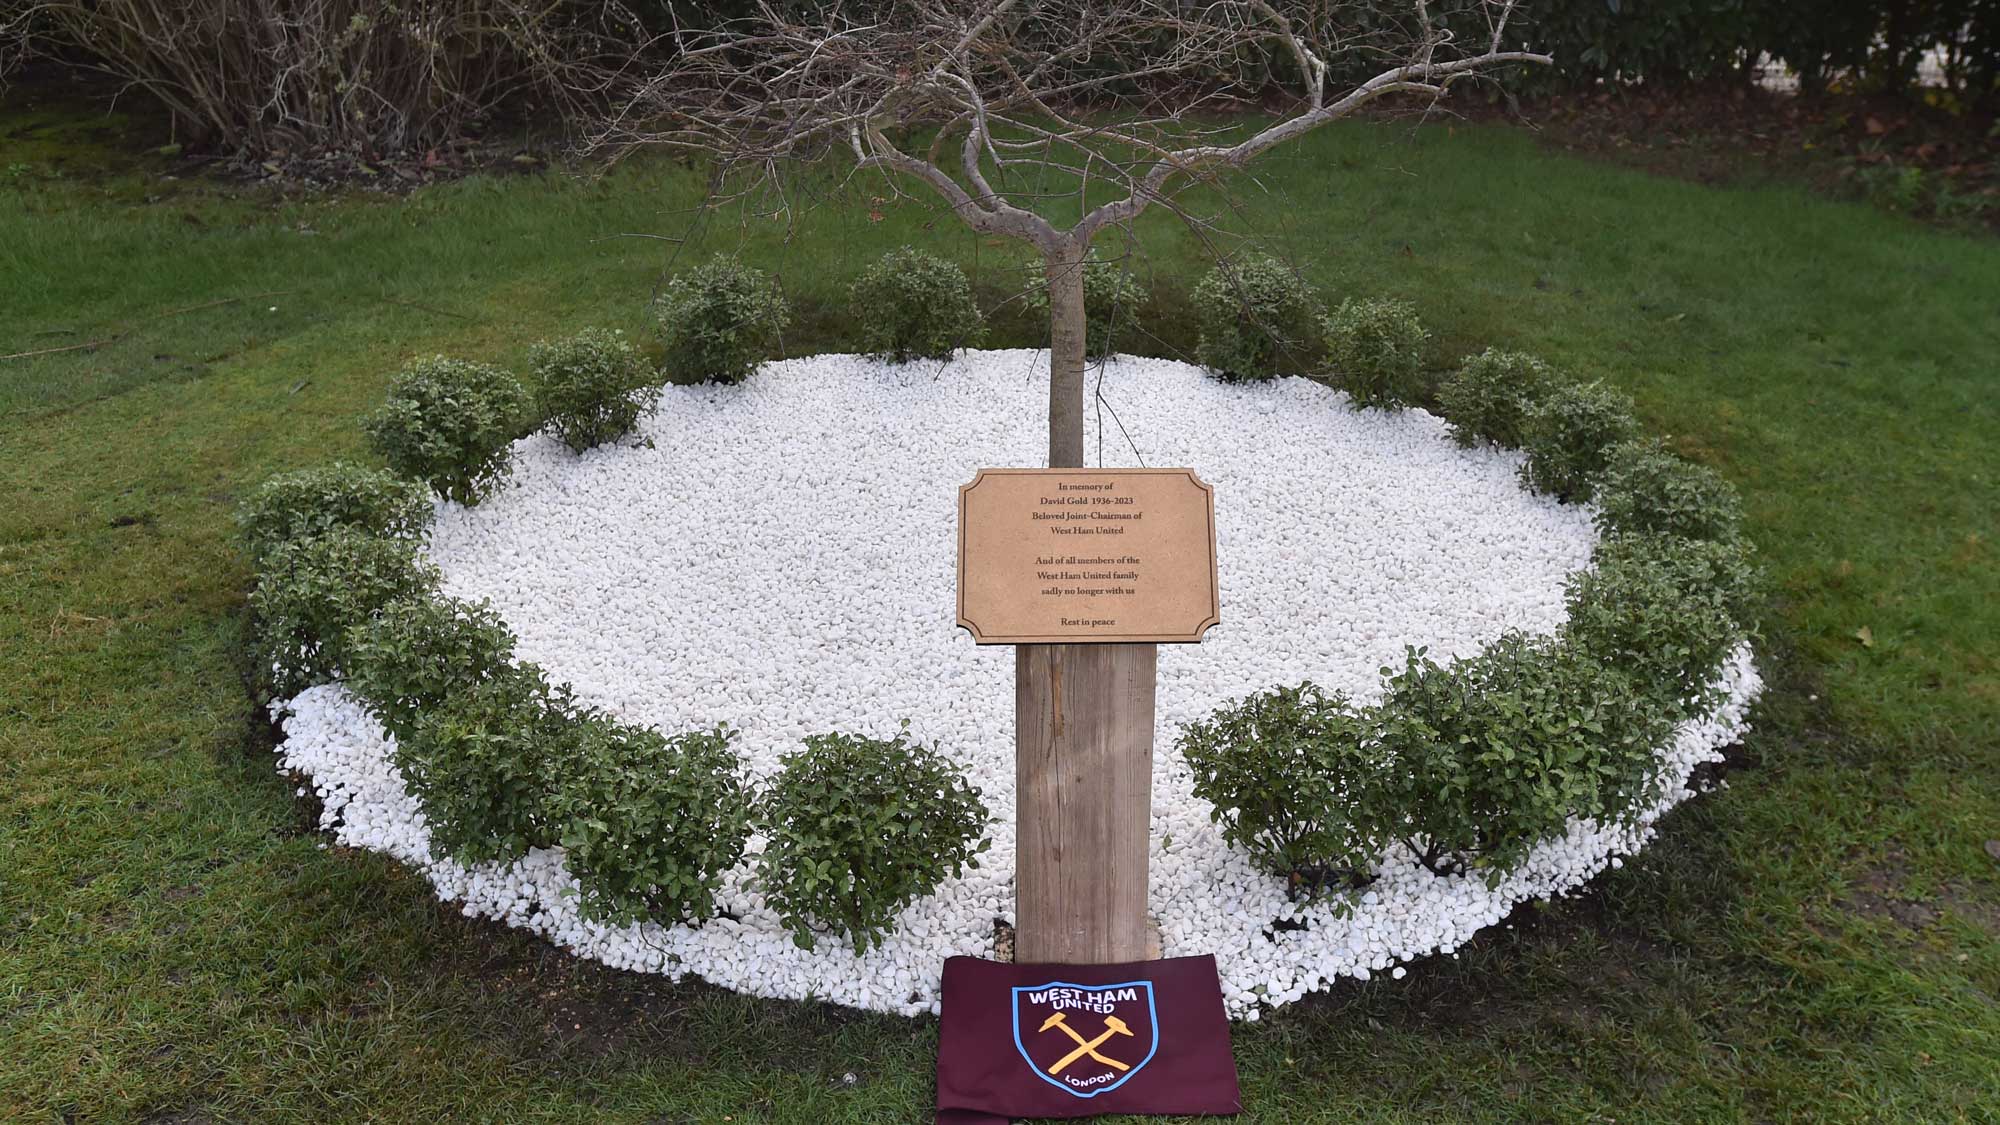 A red Acer tree has been dedicated in memory of David Gold